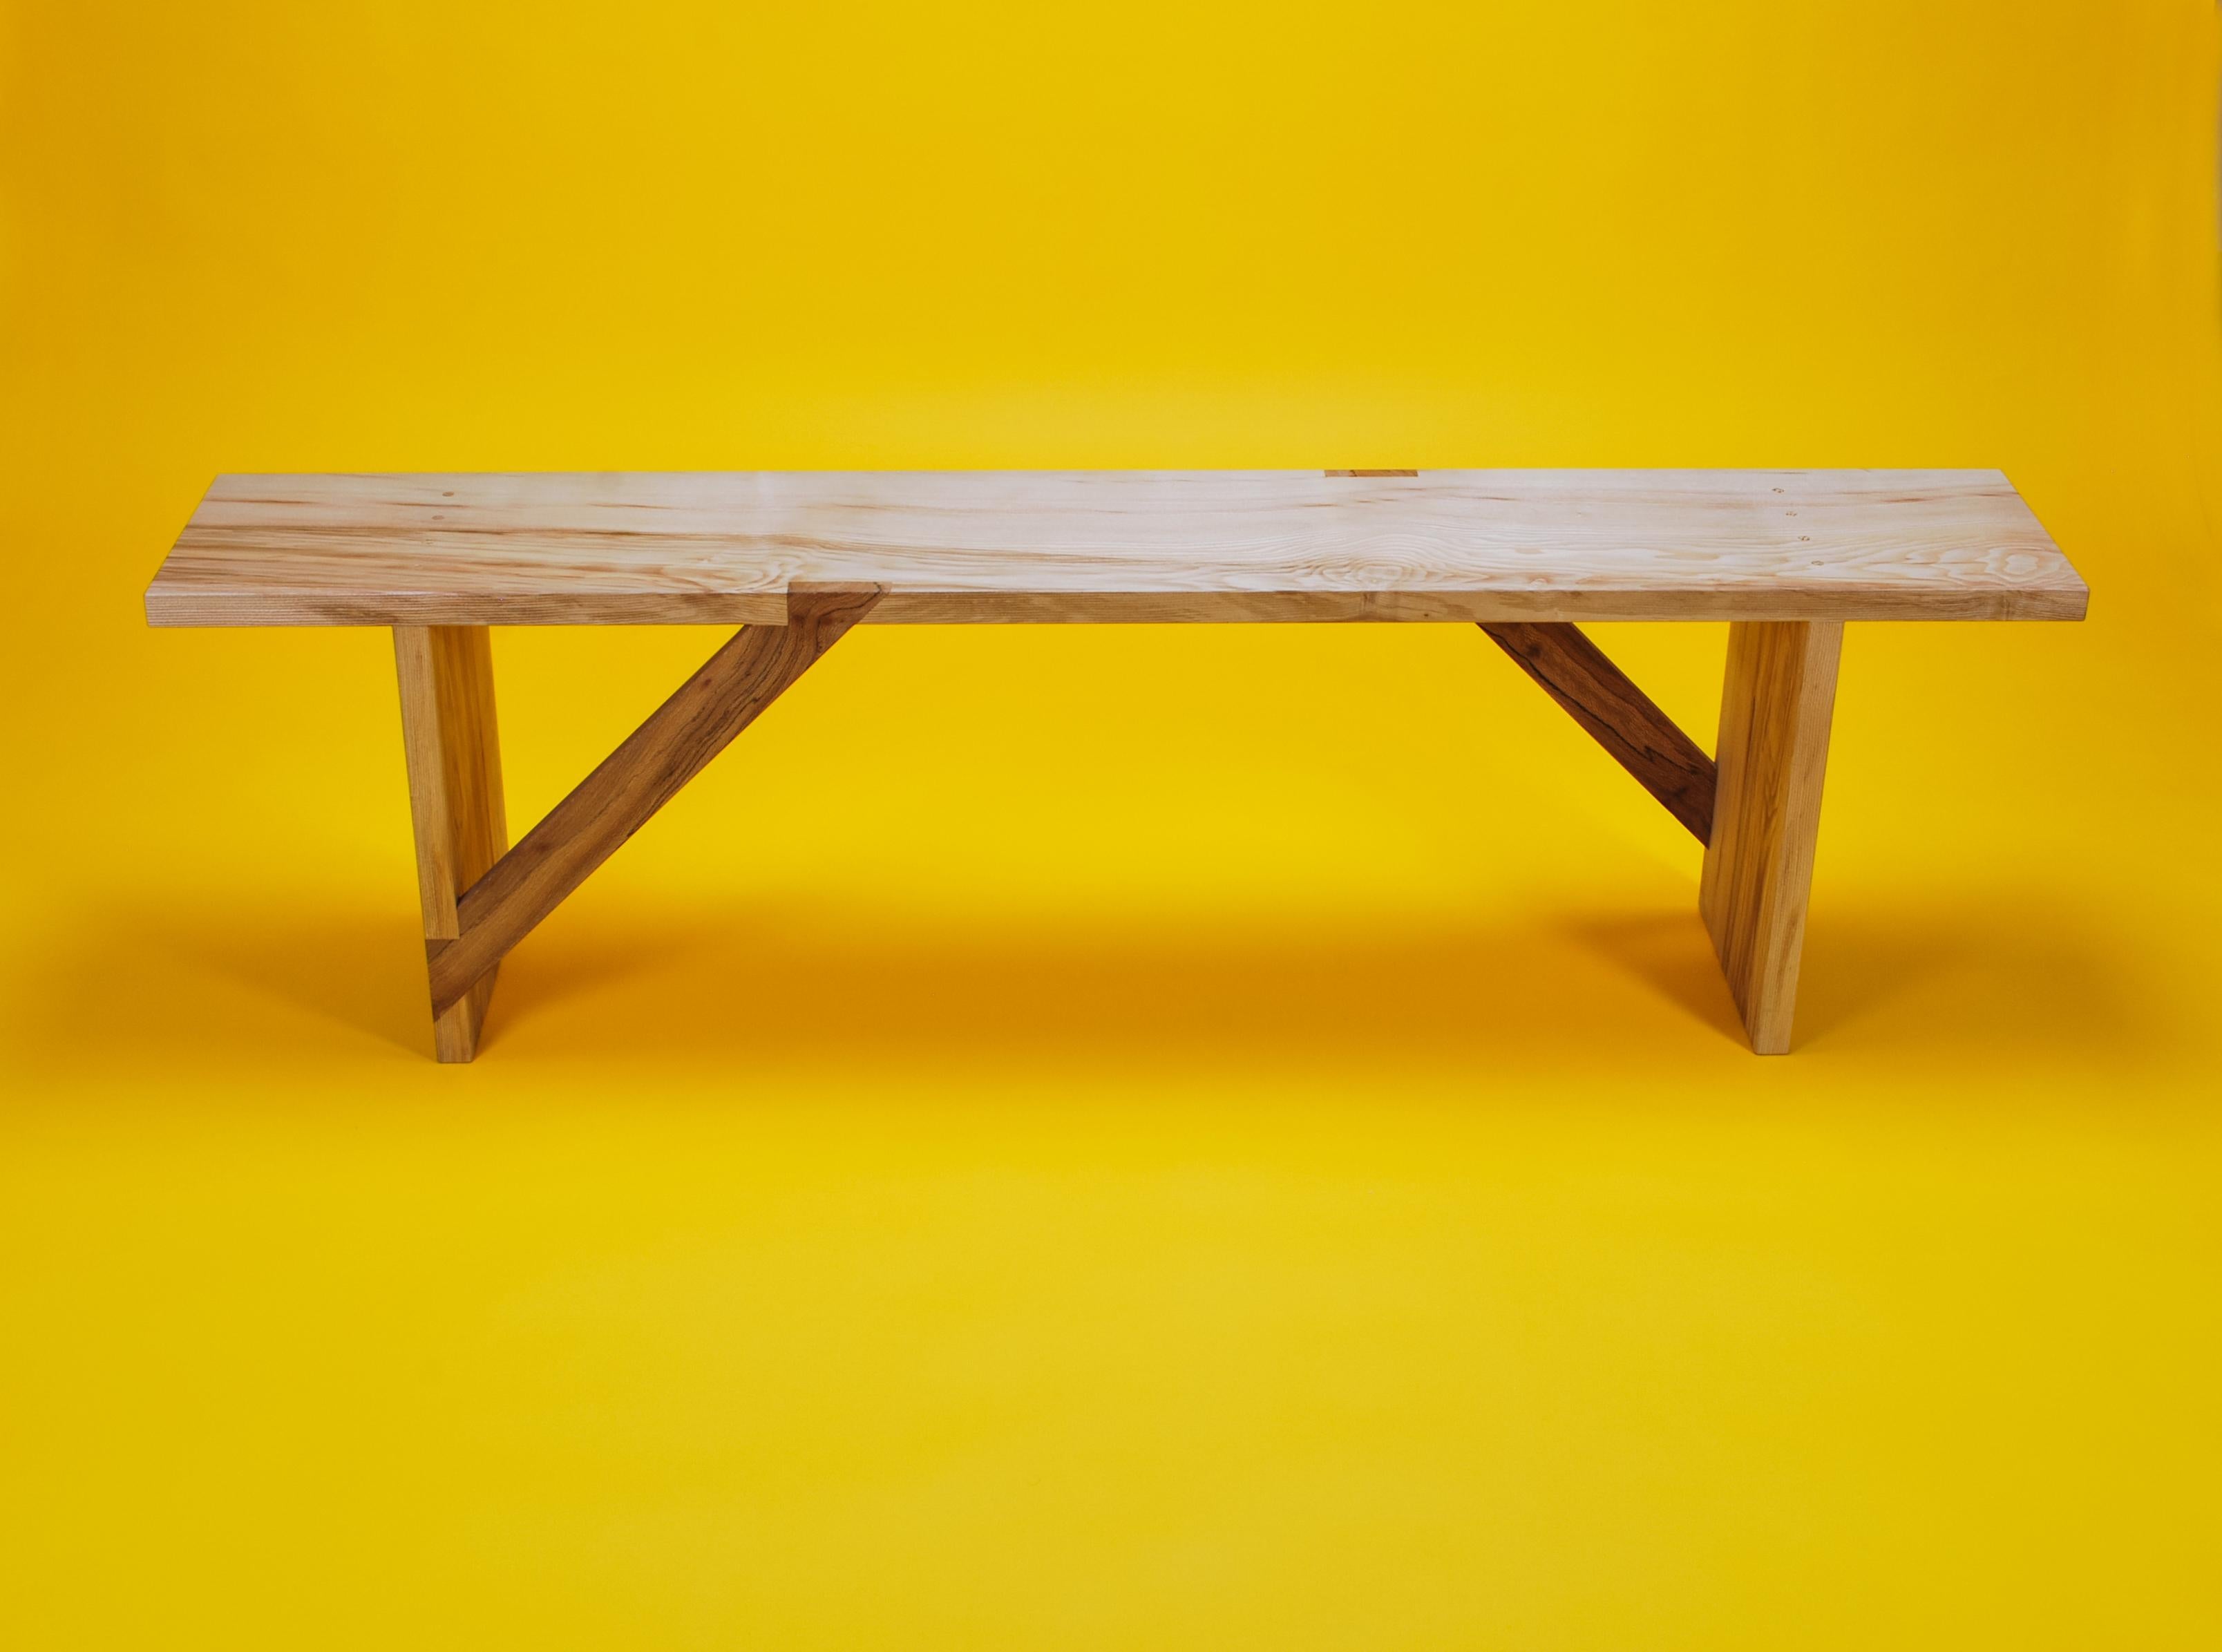 Bench in Solid English Ash and London Plane wood, designed by Loose Fit. Seats three people.

Both versatile and functional, this bench made from a light coloured English Ash, contrasts beautifully with rich brown London Plane braces.

The design of